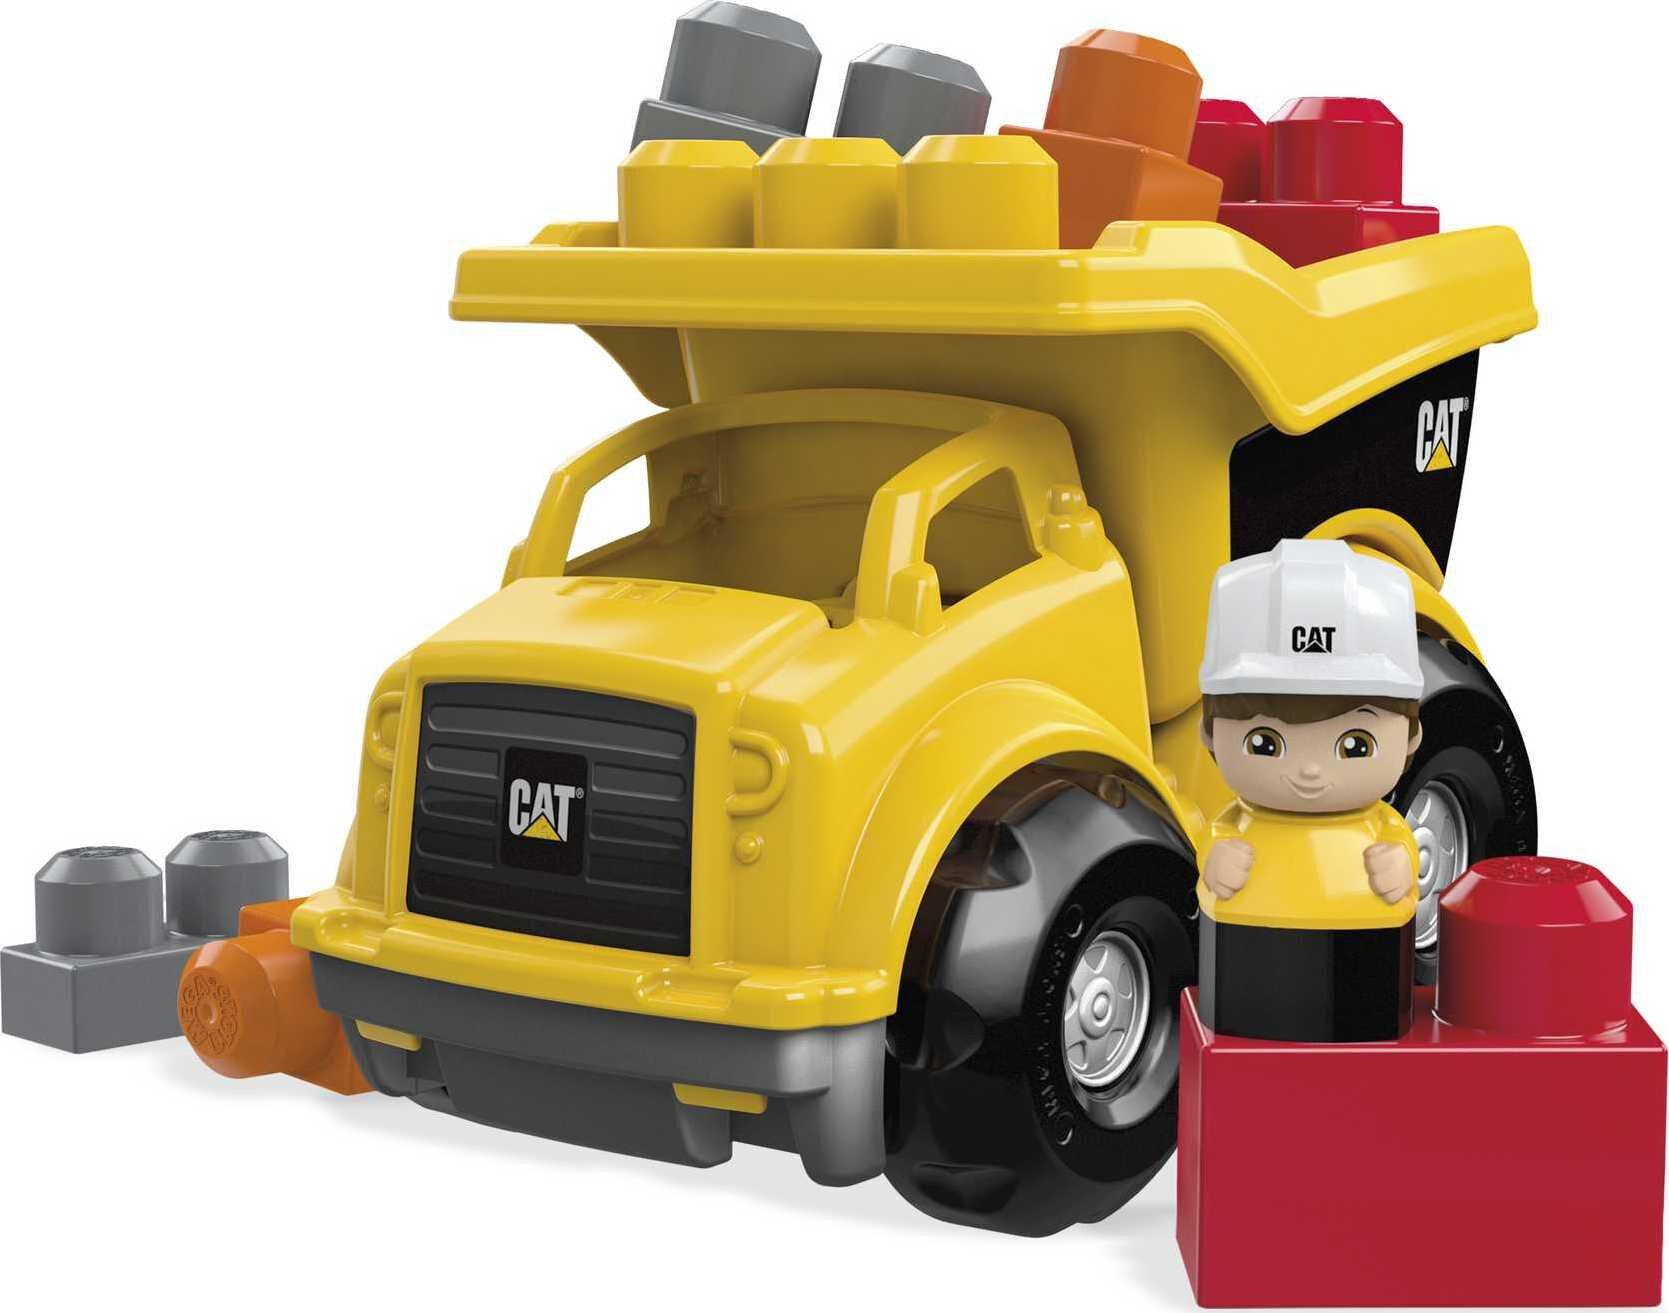 MEGA BLOKS Cat Building Toy Blocks Lil Dump Truck (7 Pieces) Fisher Price For Toddler - image 1 of 6